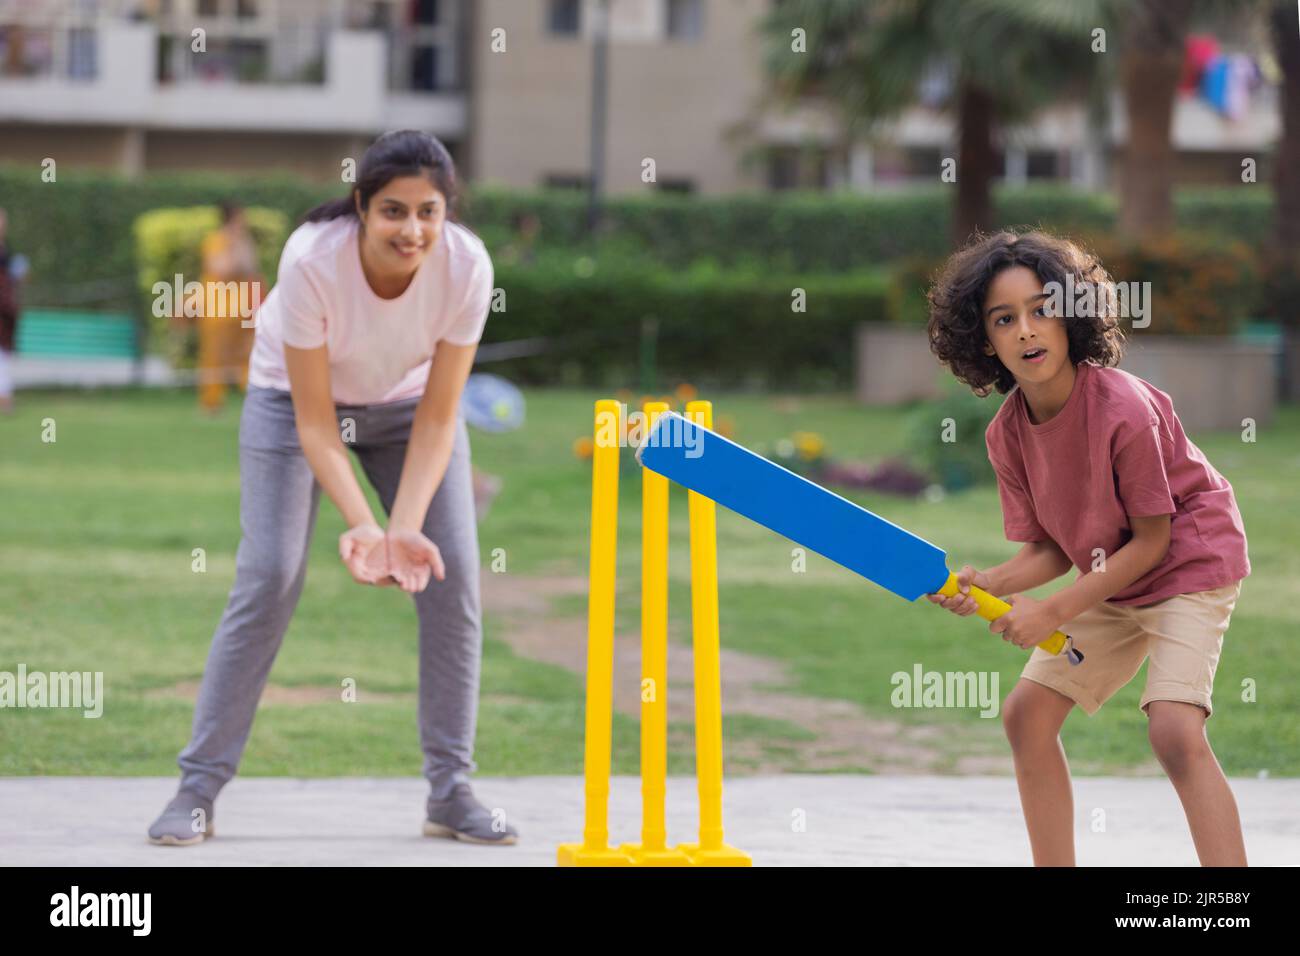 Family playing cricket in the park Stock Photo